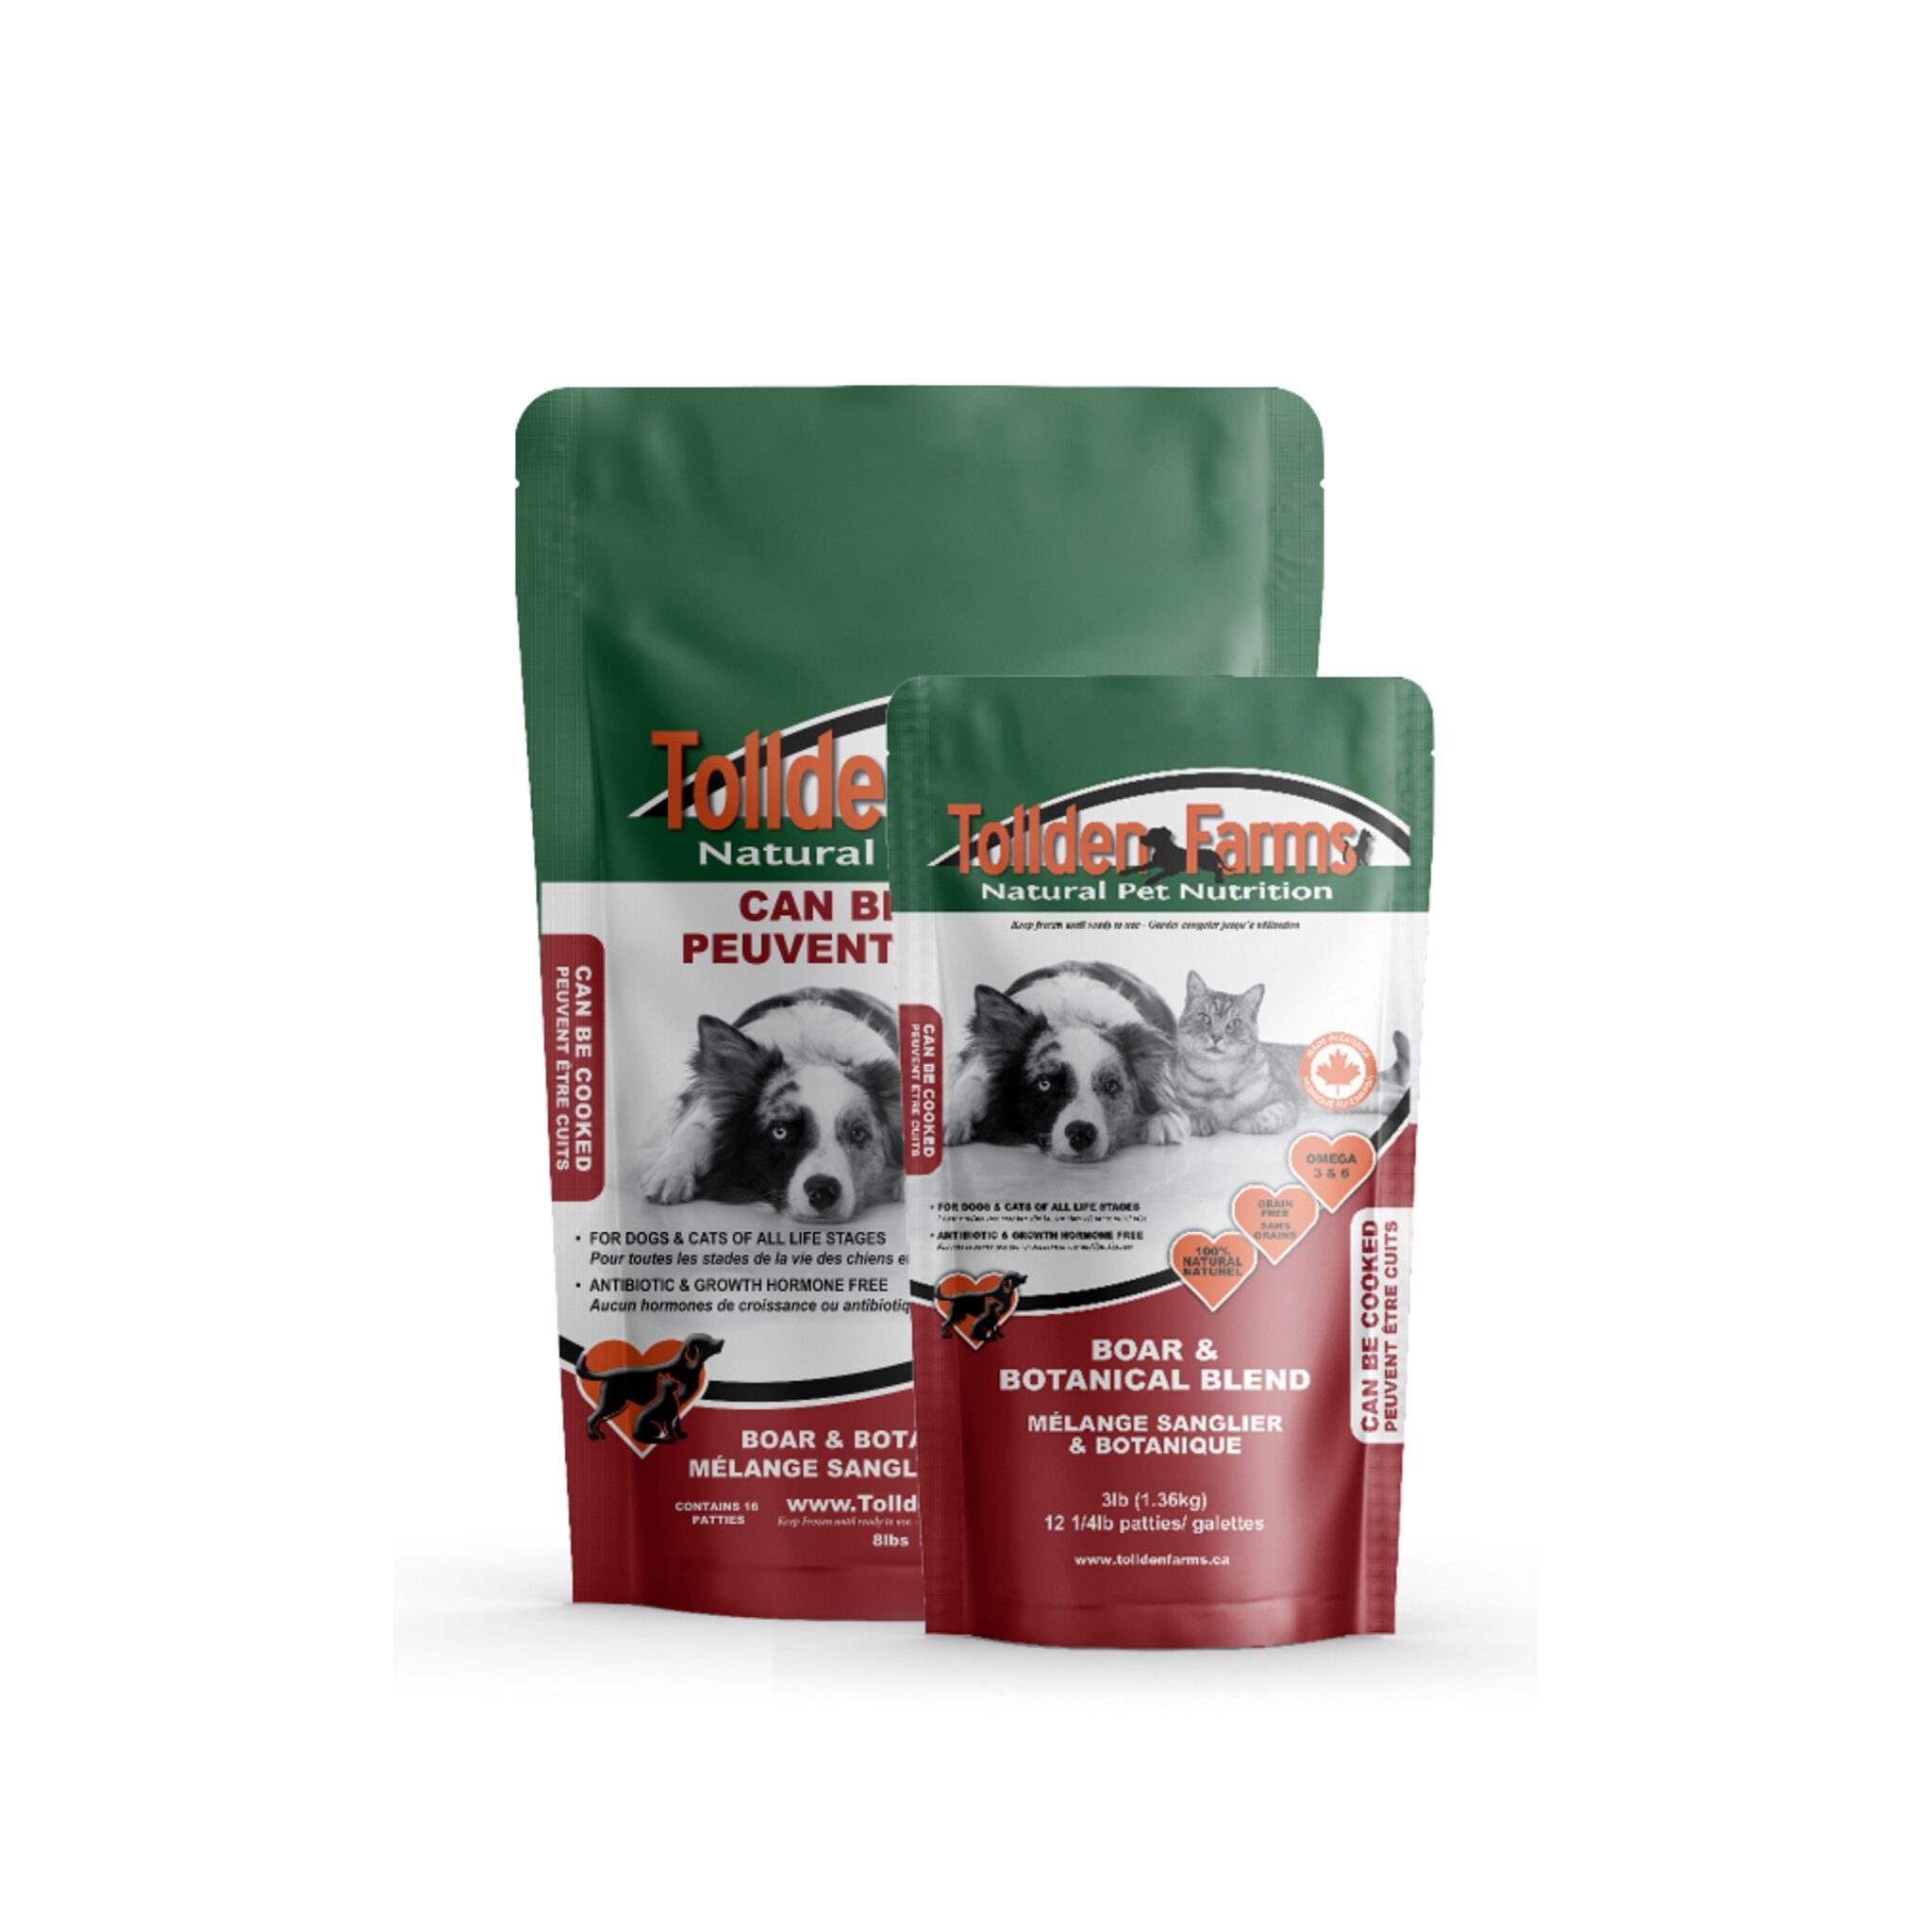 Tollden Farms raw dog food, Boar & Botanical Blend, for dogs and cats, 8 lb and 3 lb options.